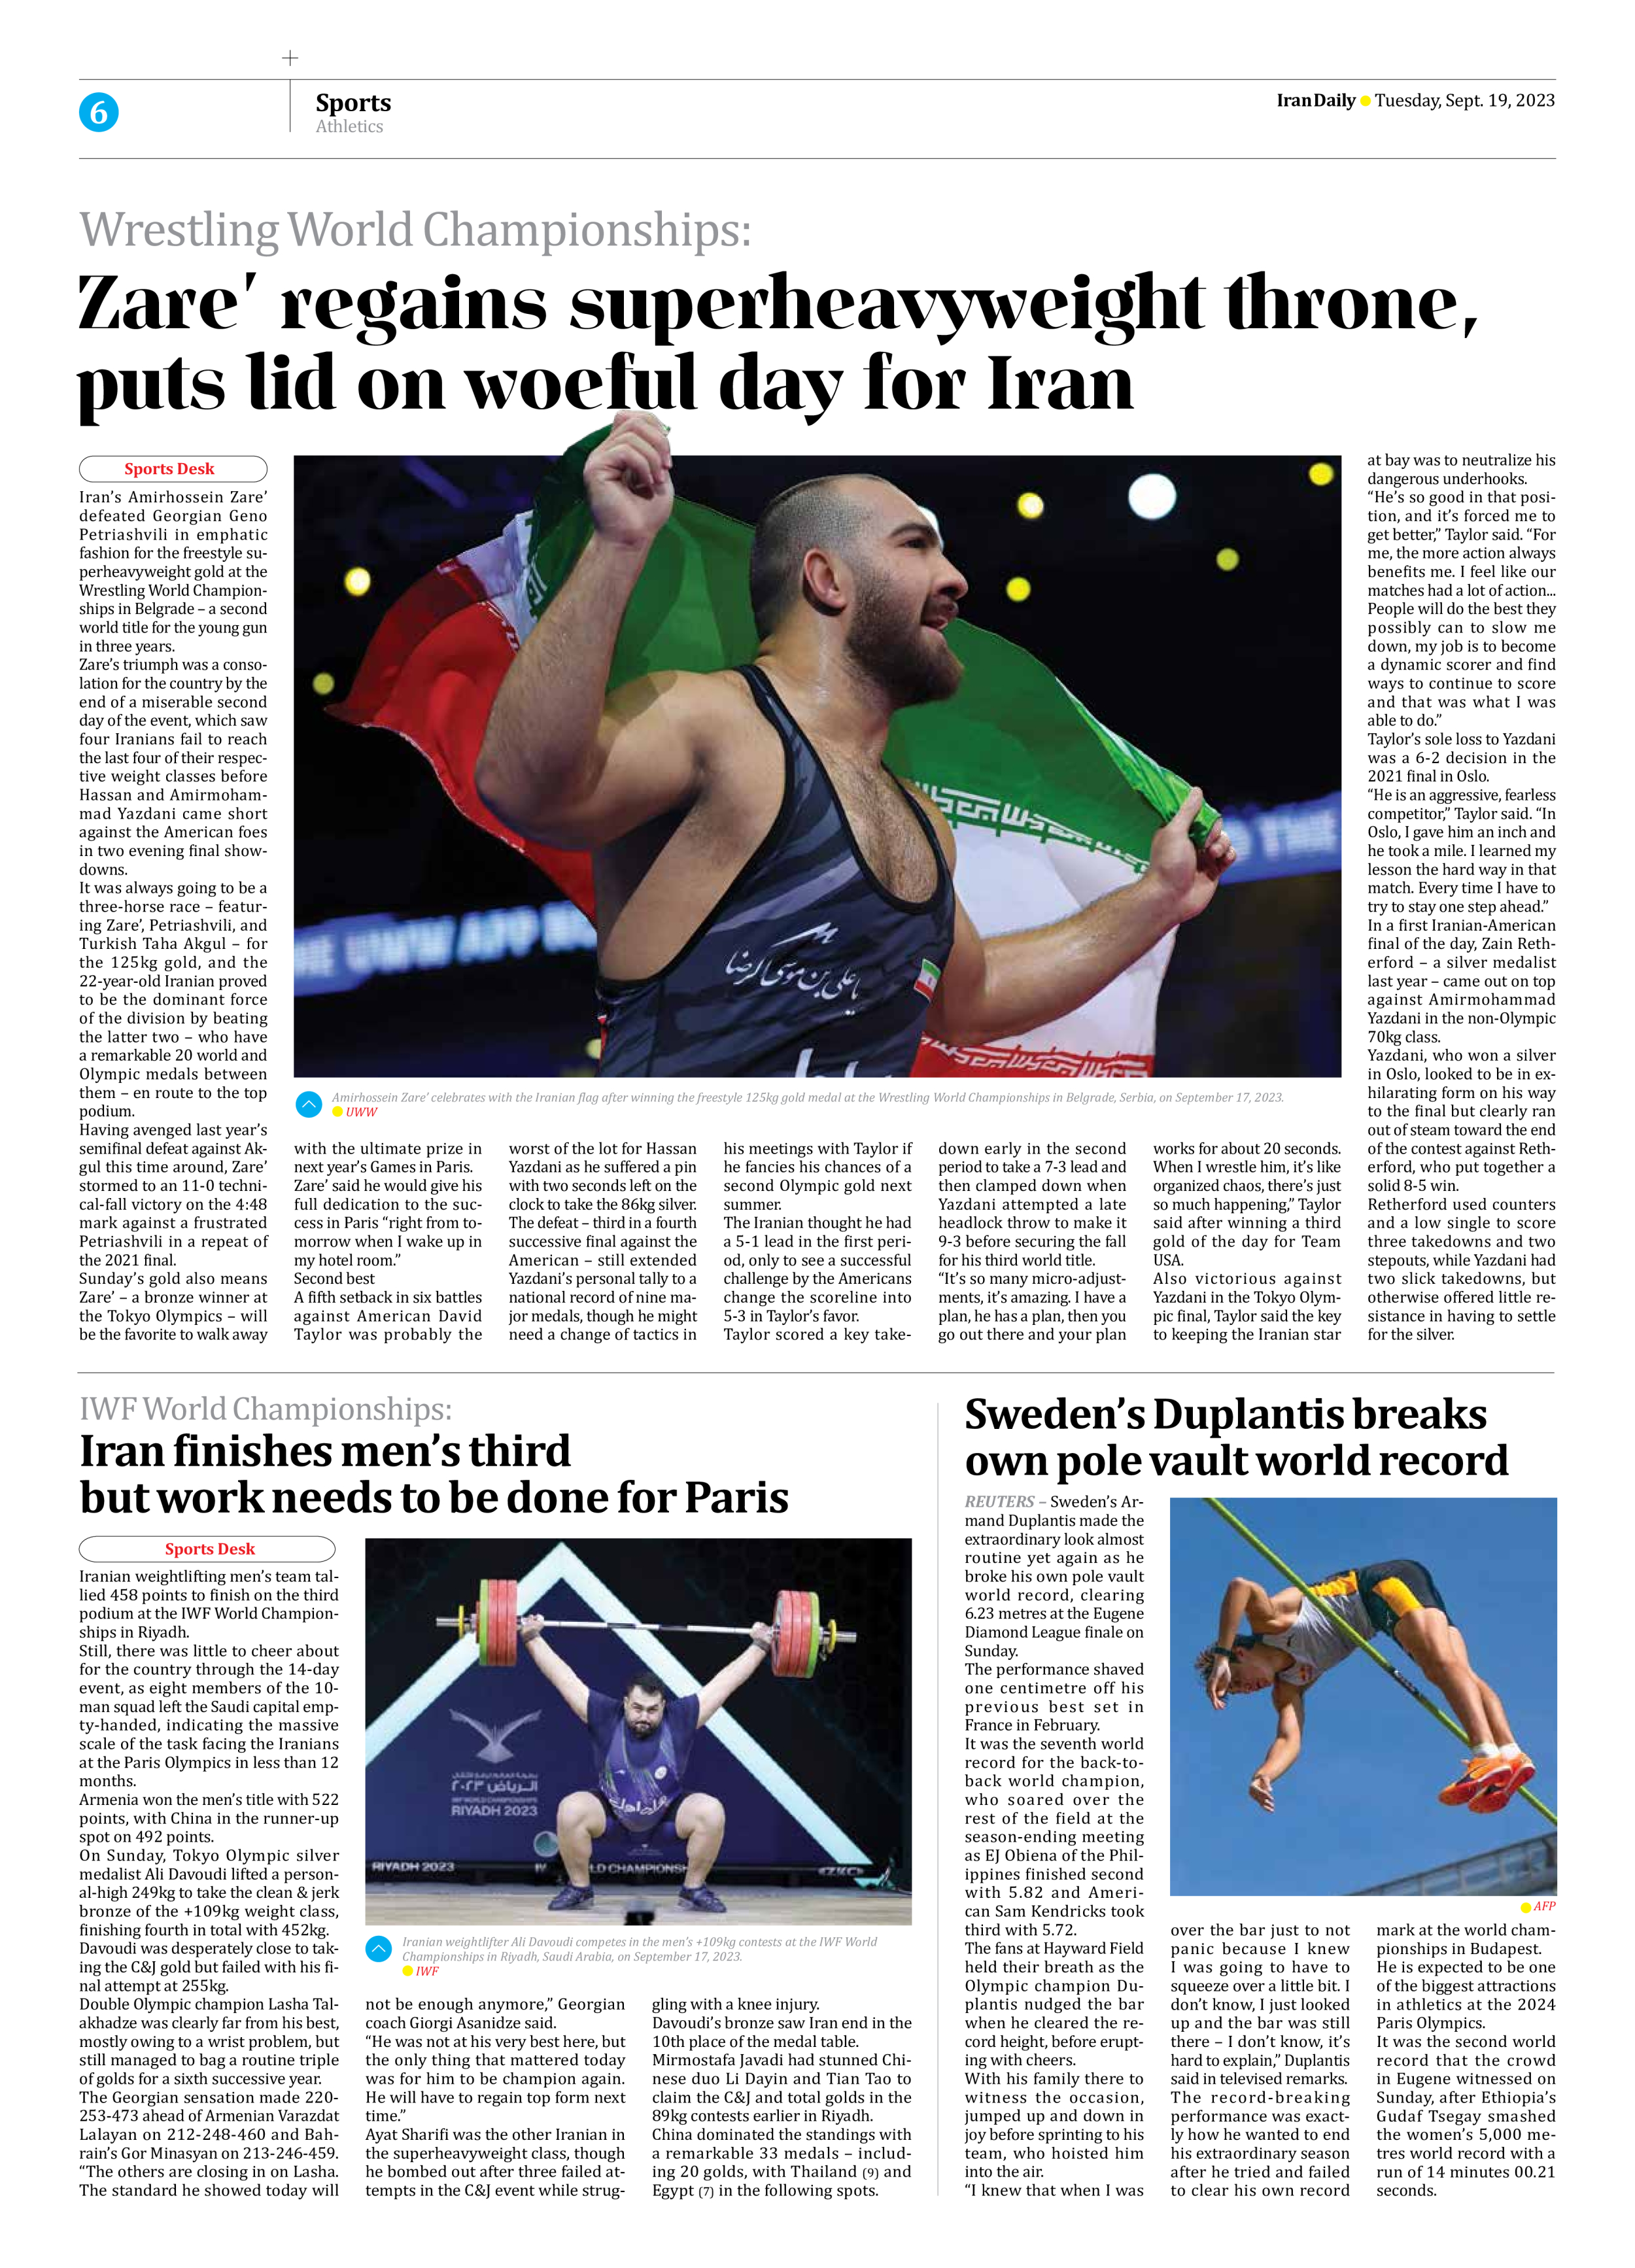 Iran Daily - Number Seven Thousand Three Hundred and Eighty Nine - 19 September 2023 - Page 6